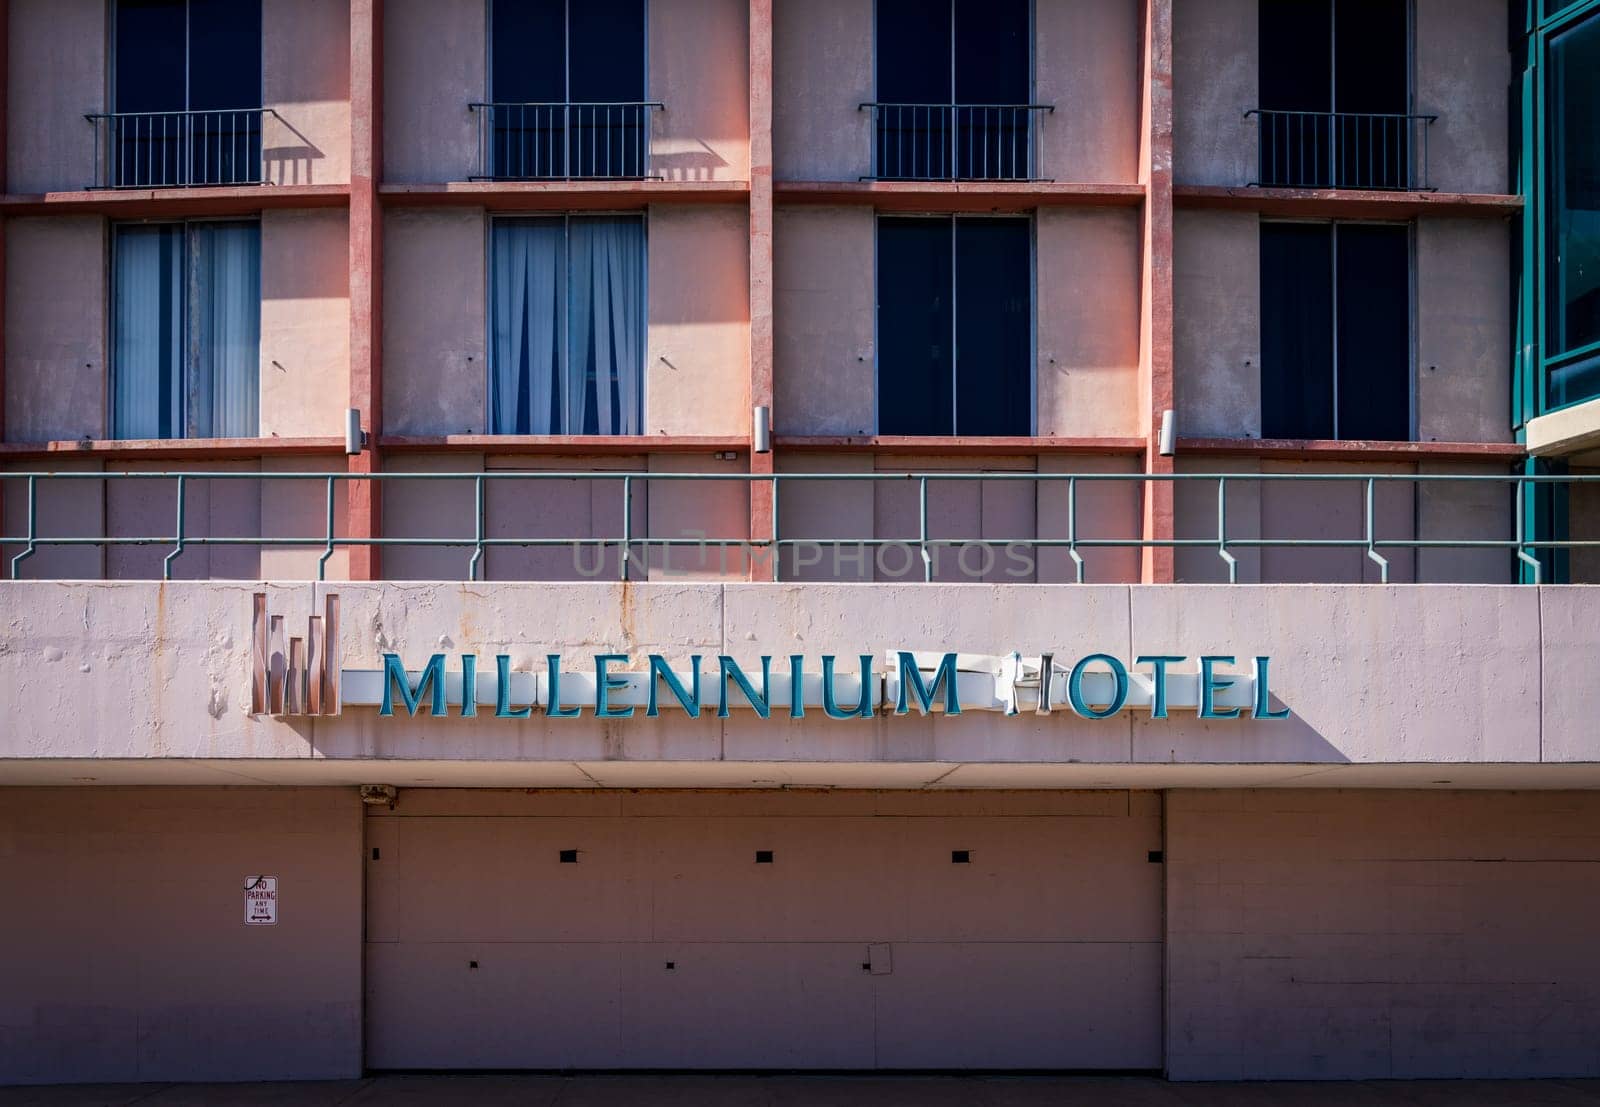 Abandoned Millenium Hotel in downtown St Louis Missouri by steheap